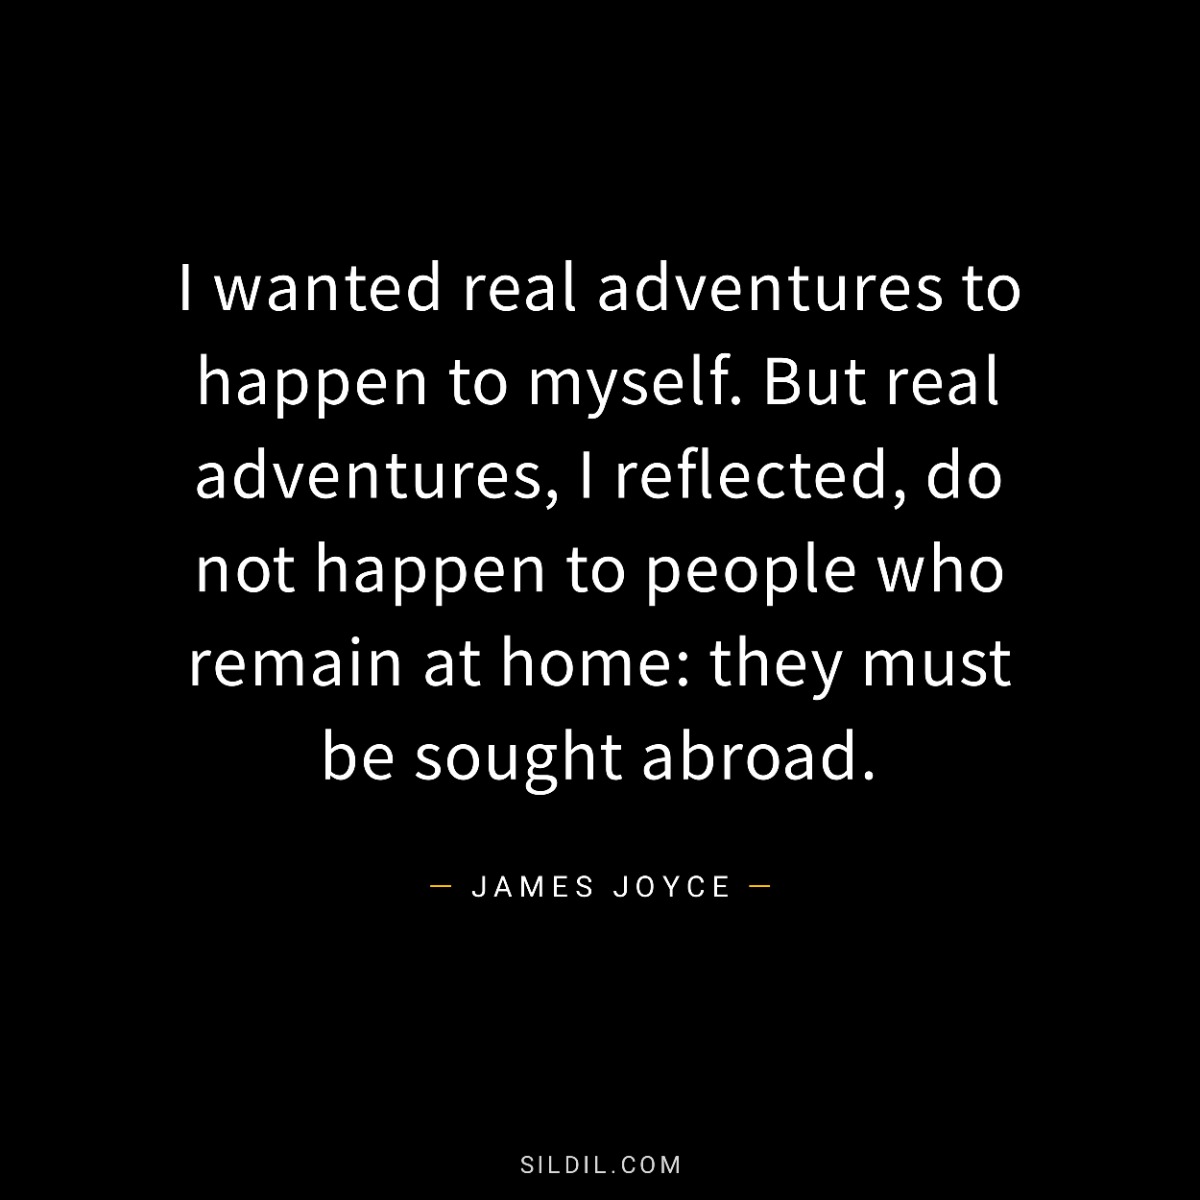 I wanted real adventures to happen to myself. But real adventures, I reflected, do not happen to people who remain at home: they must be sought abroad.